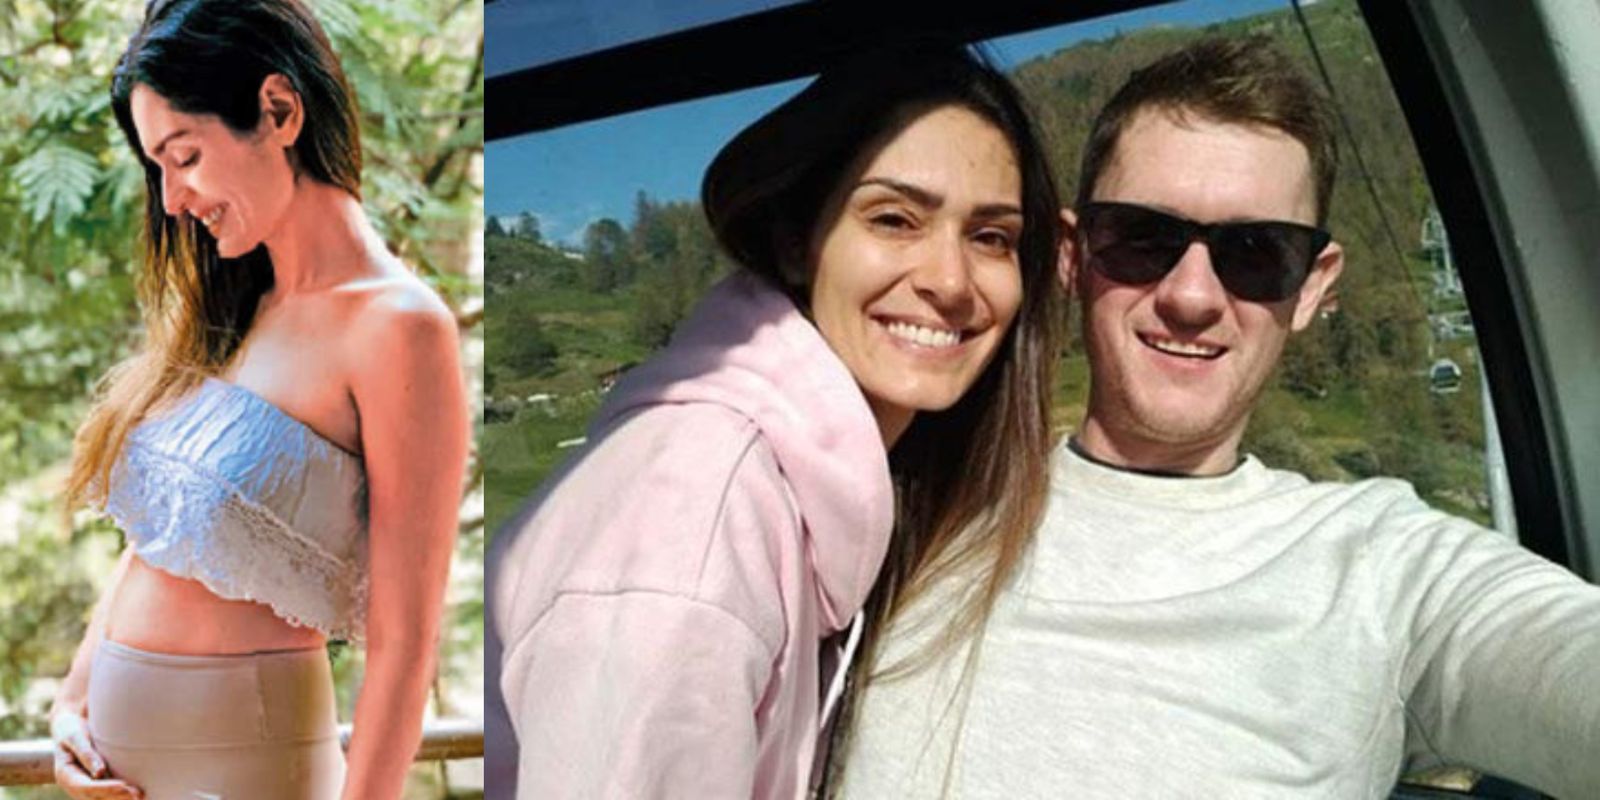 Grand Masti Actress Bruna Abdullah Is 5 Months Pregnant With Fiancé Allan Fraser’s Child!